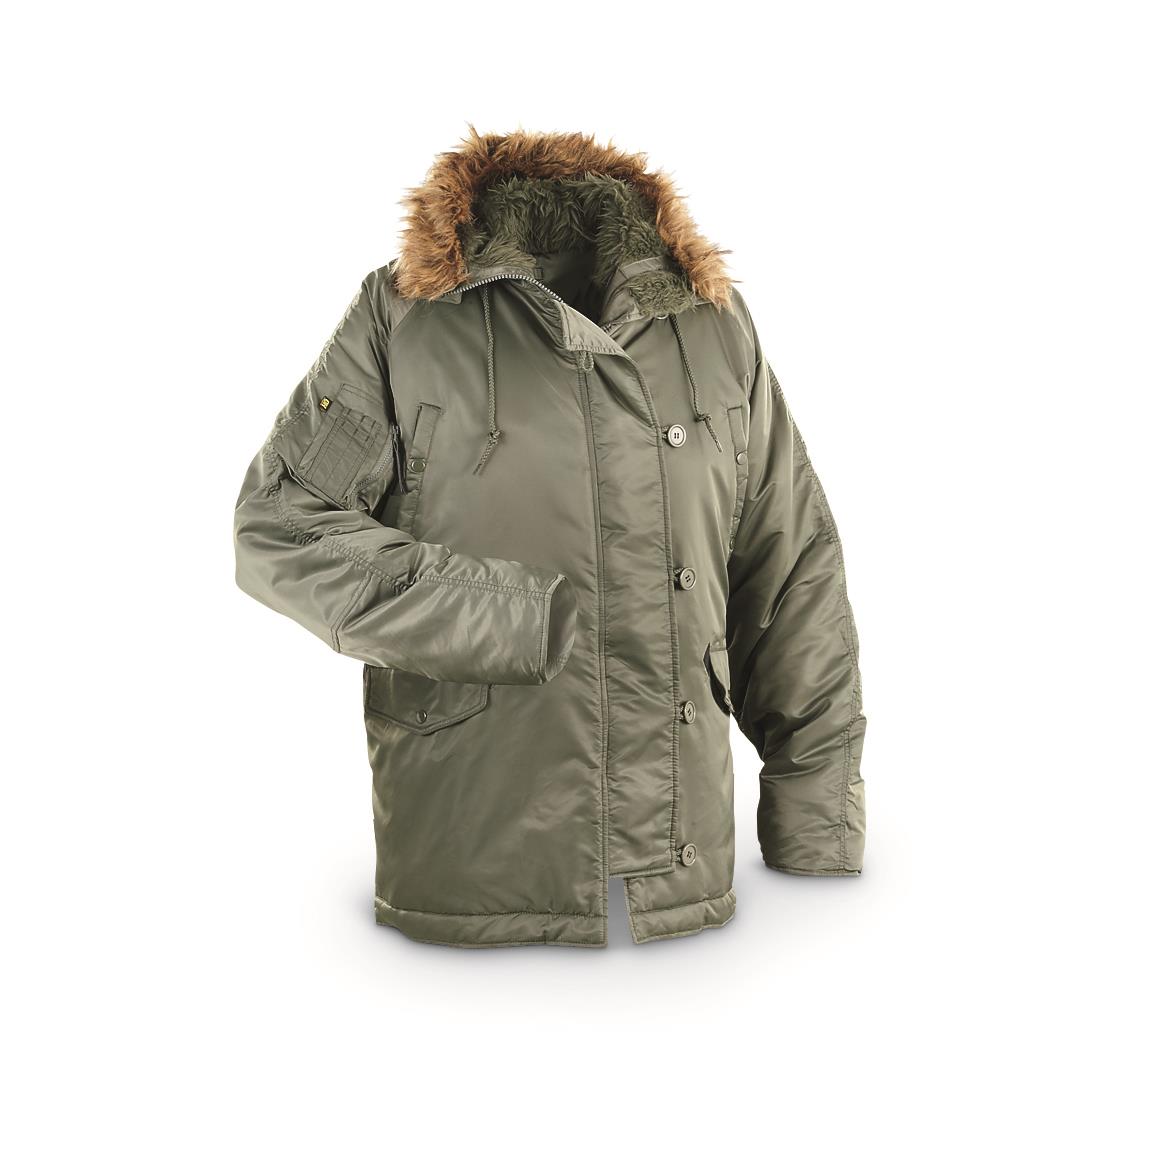 HQ ISSUE Men's N-3B Military Parka Jacket - 614674, Tactical ...